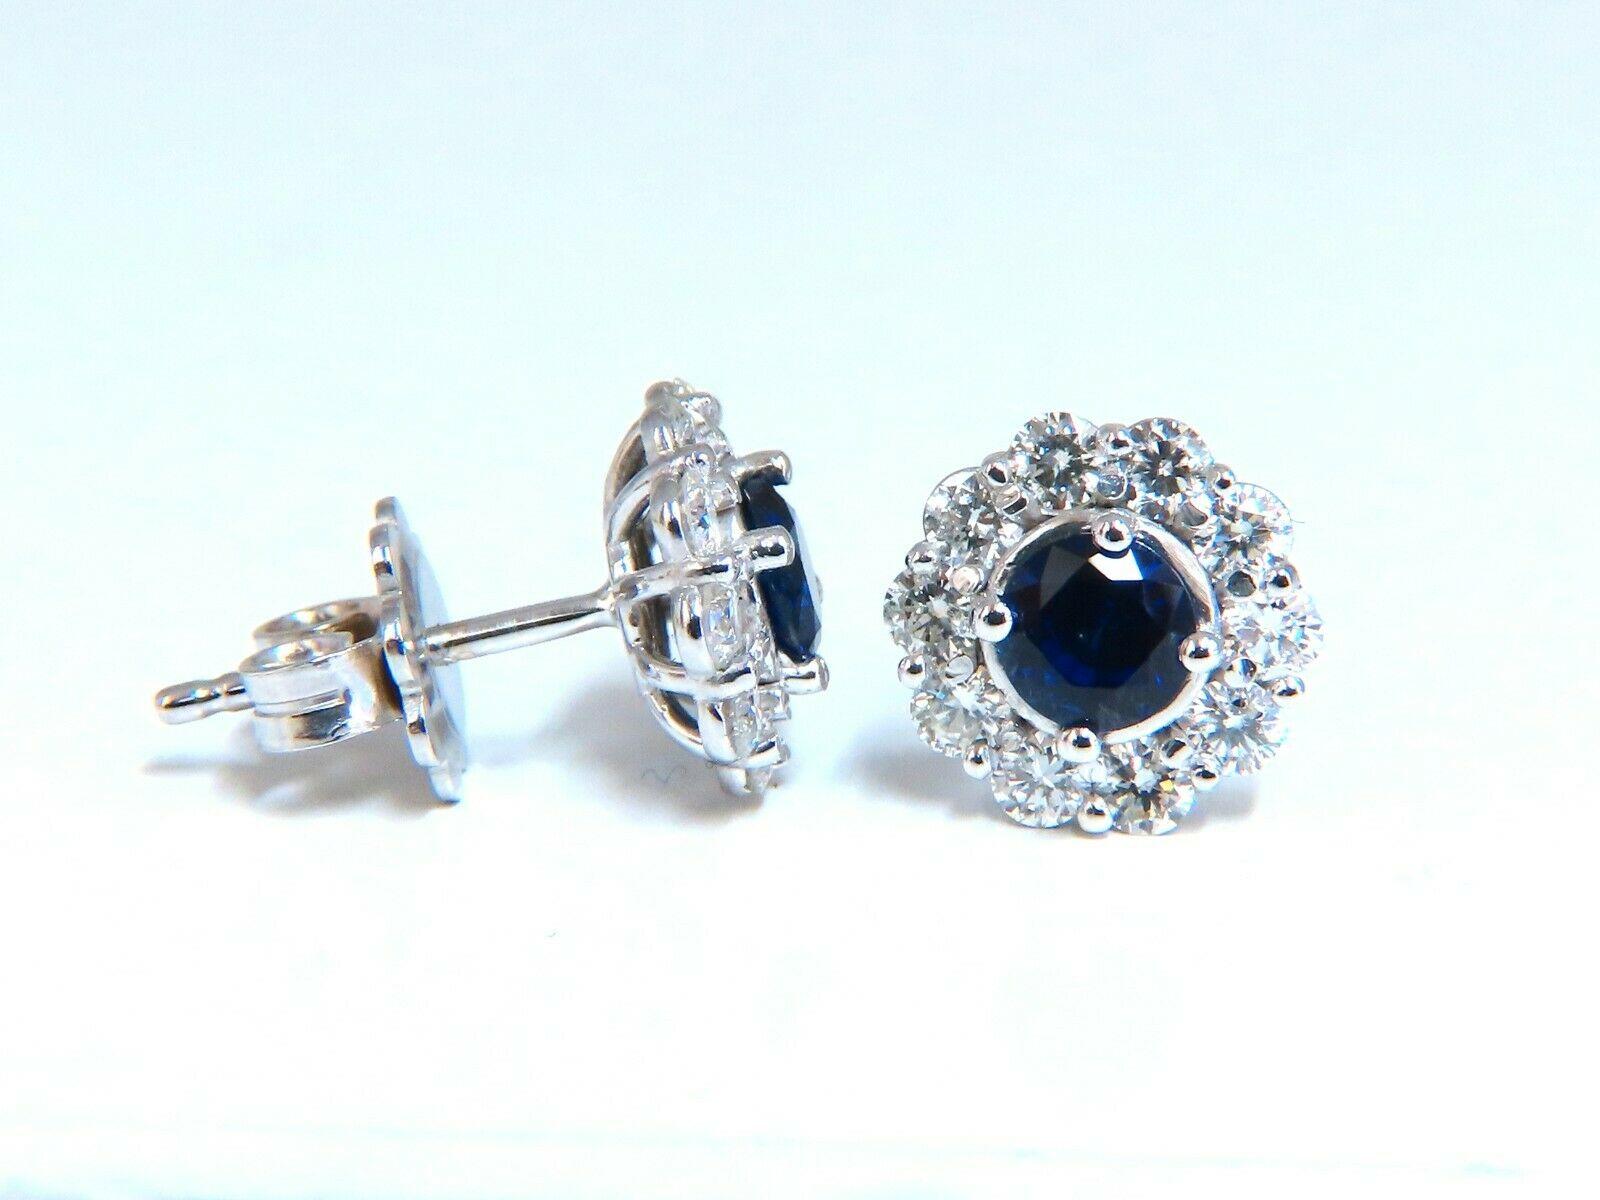 Sapphire Cluster Prime

Natural sapphire & Diamonds classic cocktail Stud earrings

1.00ct total weight sapphires

Rounds, full cut brilliants.

Each sapphire diameter: 4.4mm

Clean clarity & transparent.

Prime Royal Blue

.90ct. Round Brilliant